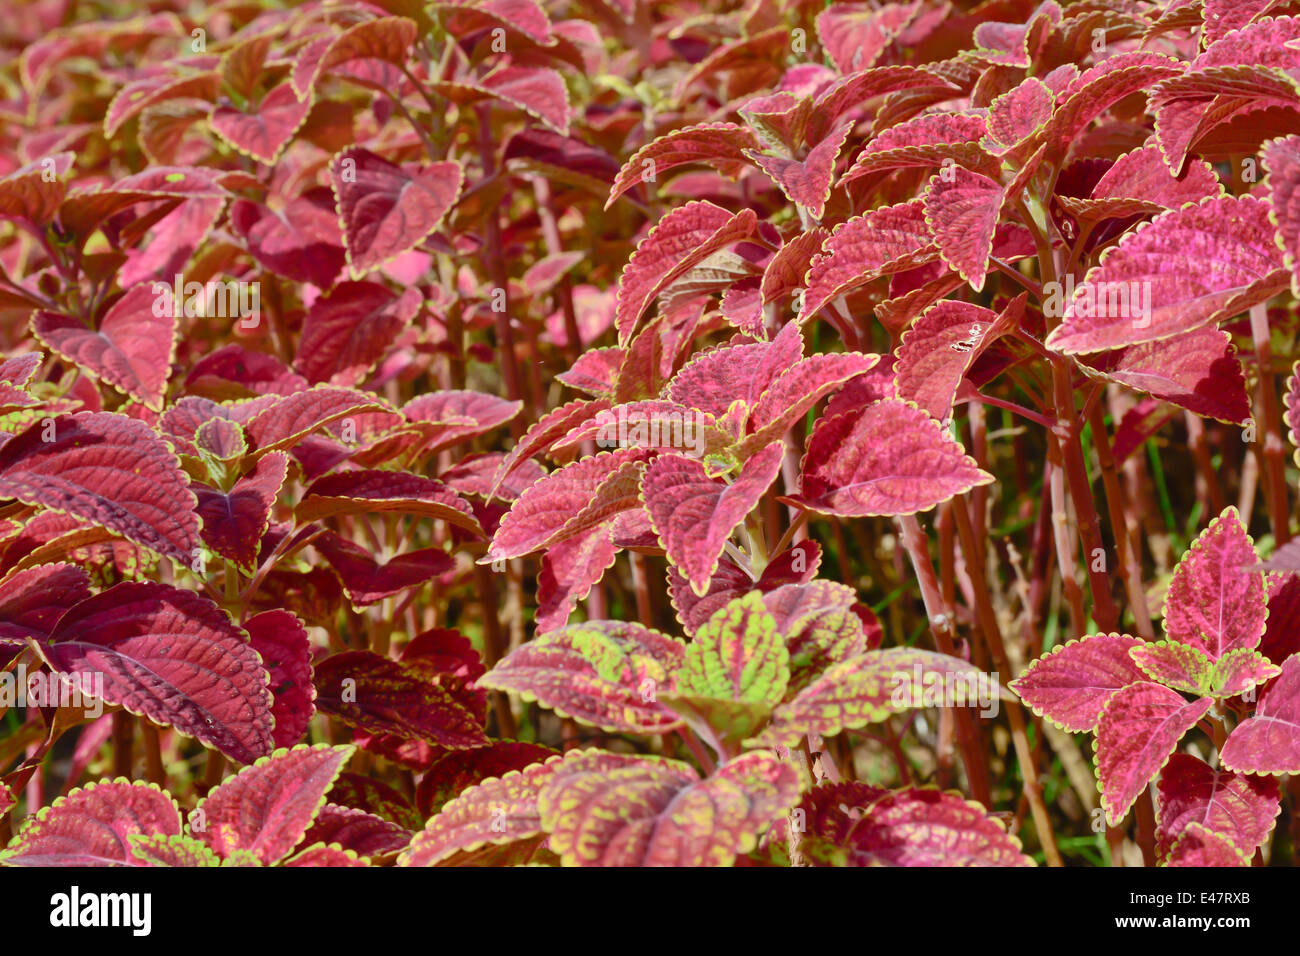 close-up of colorful coleus group in garden Stock Photo